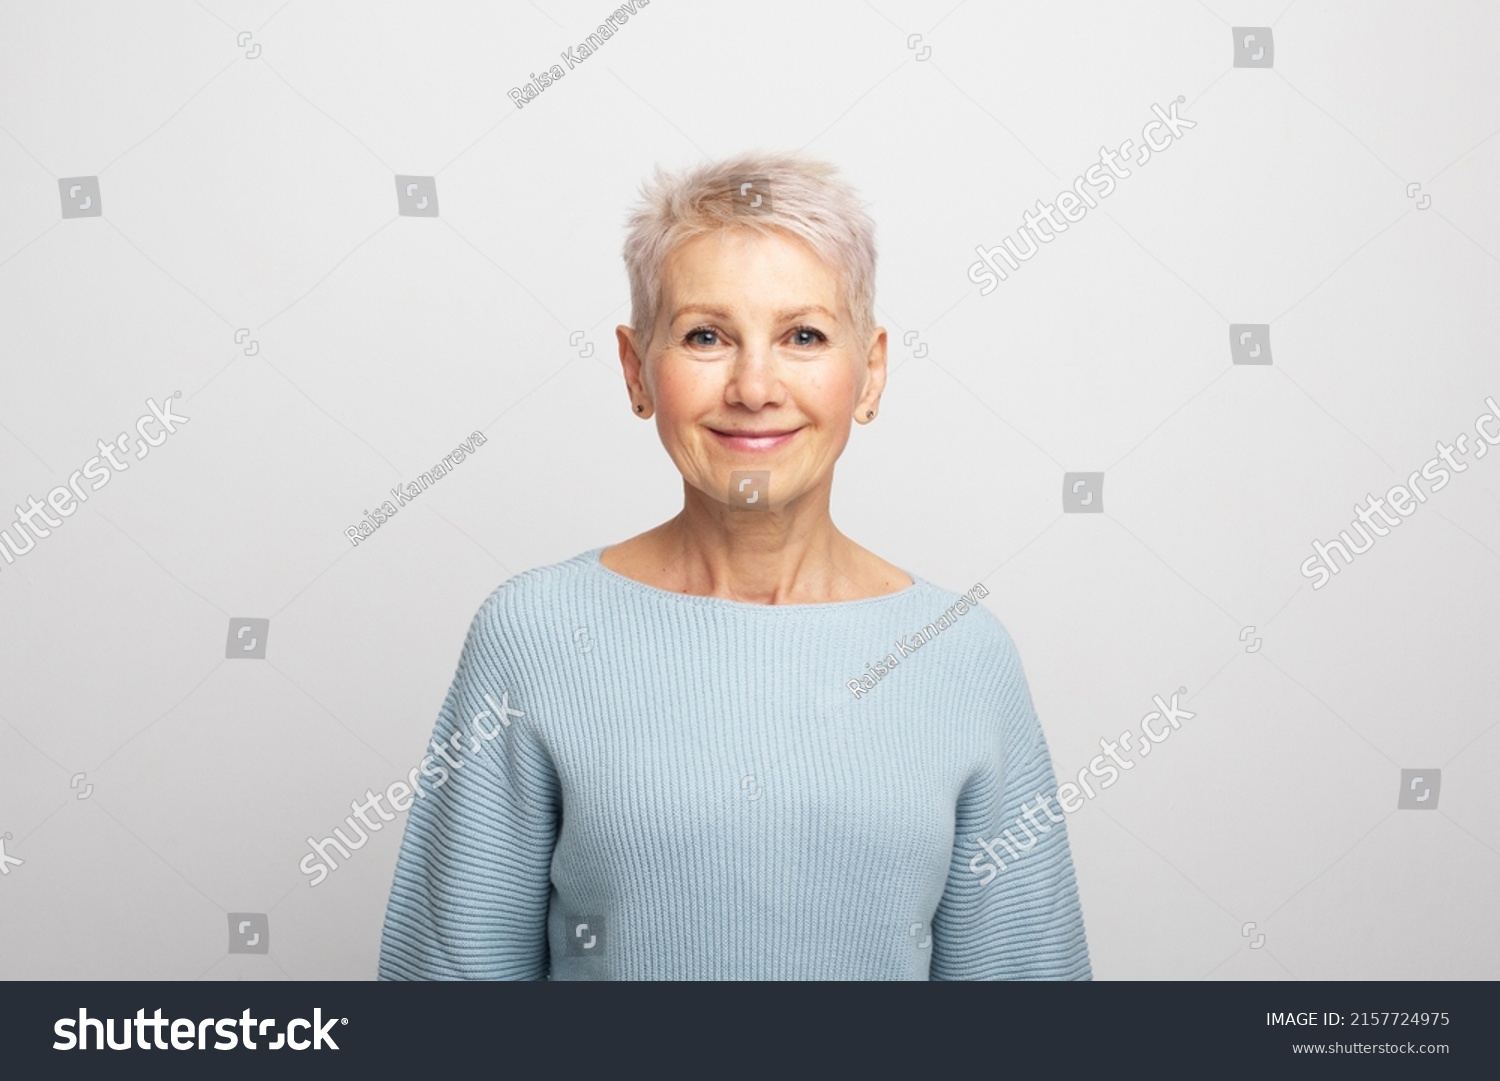 Elderly beautiful woman with a short pixie haircut in a blue sweater on a gray background #2157724975